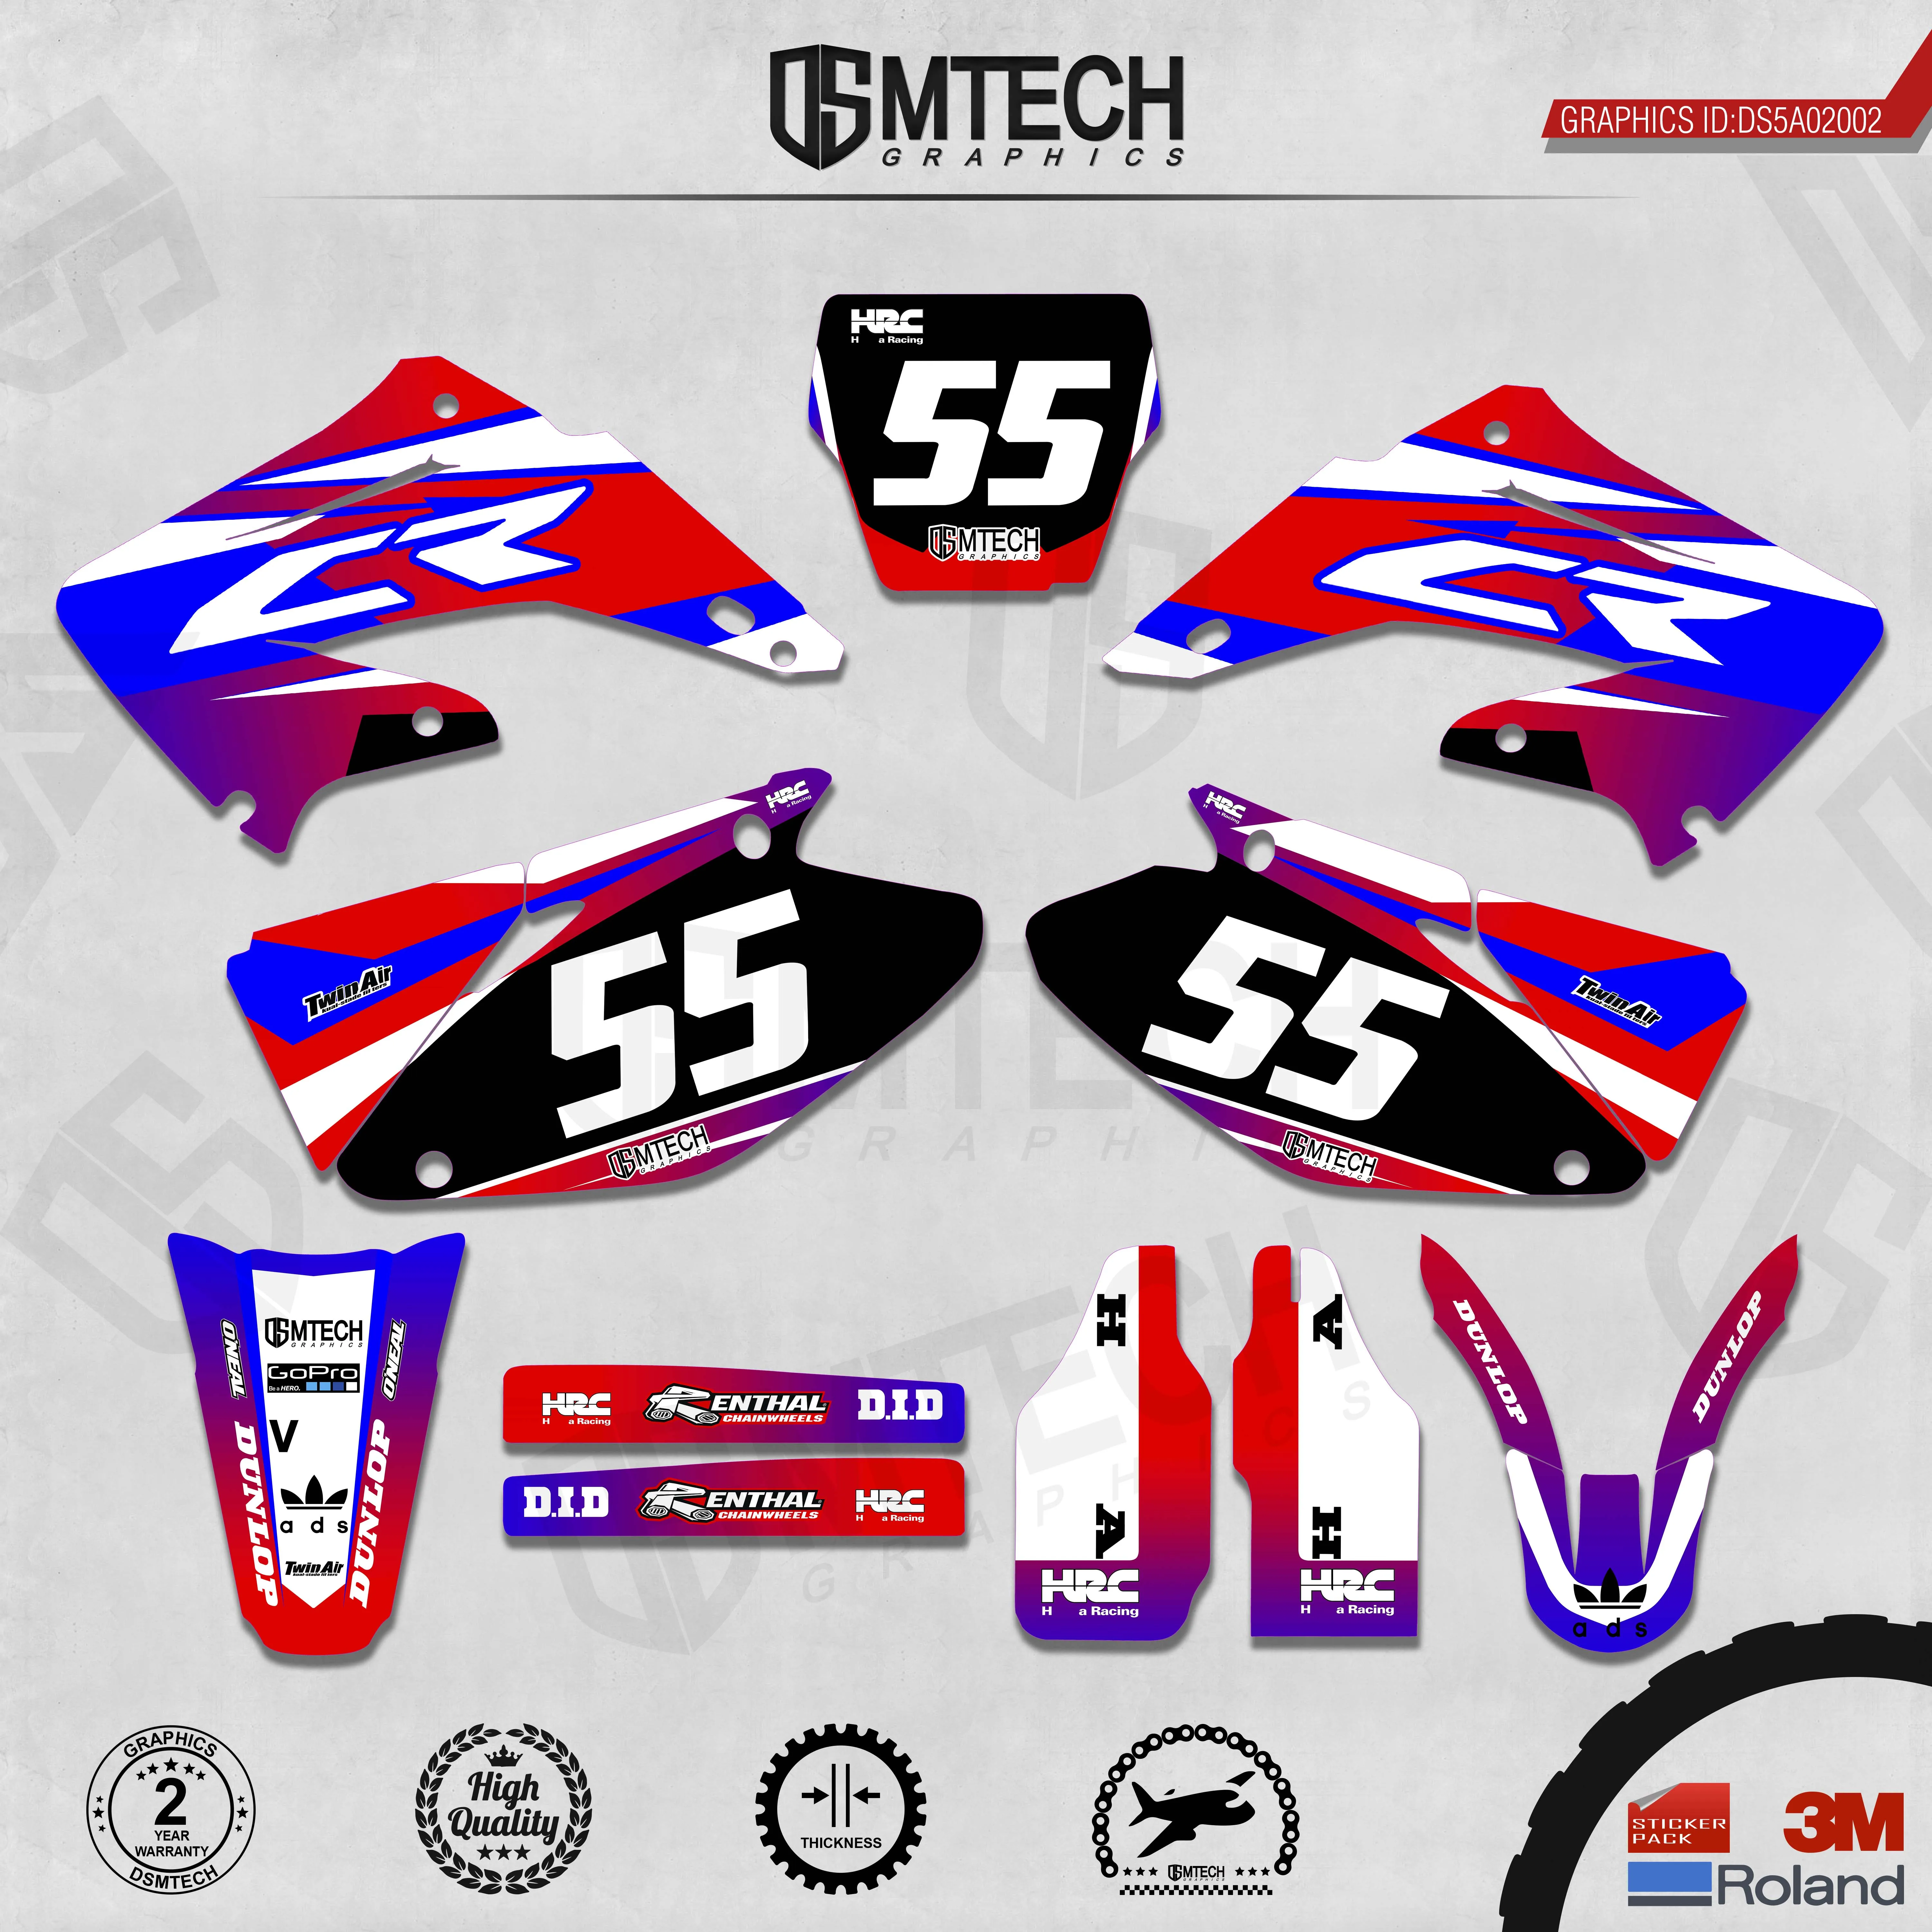 DSMTECH Customized Team Graphics Backgrounds Decals 3M Custom Stickers For 2002-2004 2005-2007 2008-2010 2011-2012 CR125-250 002 коврики eva skyway mazda 5 2005 2010 s01705291